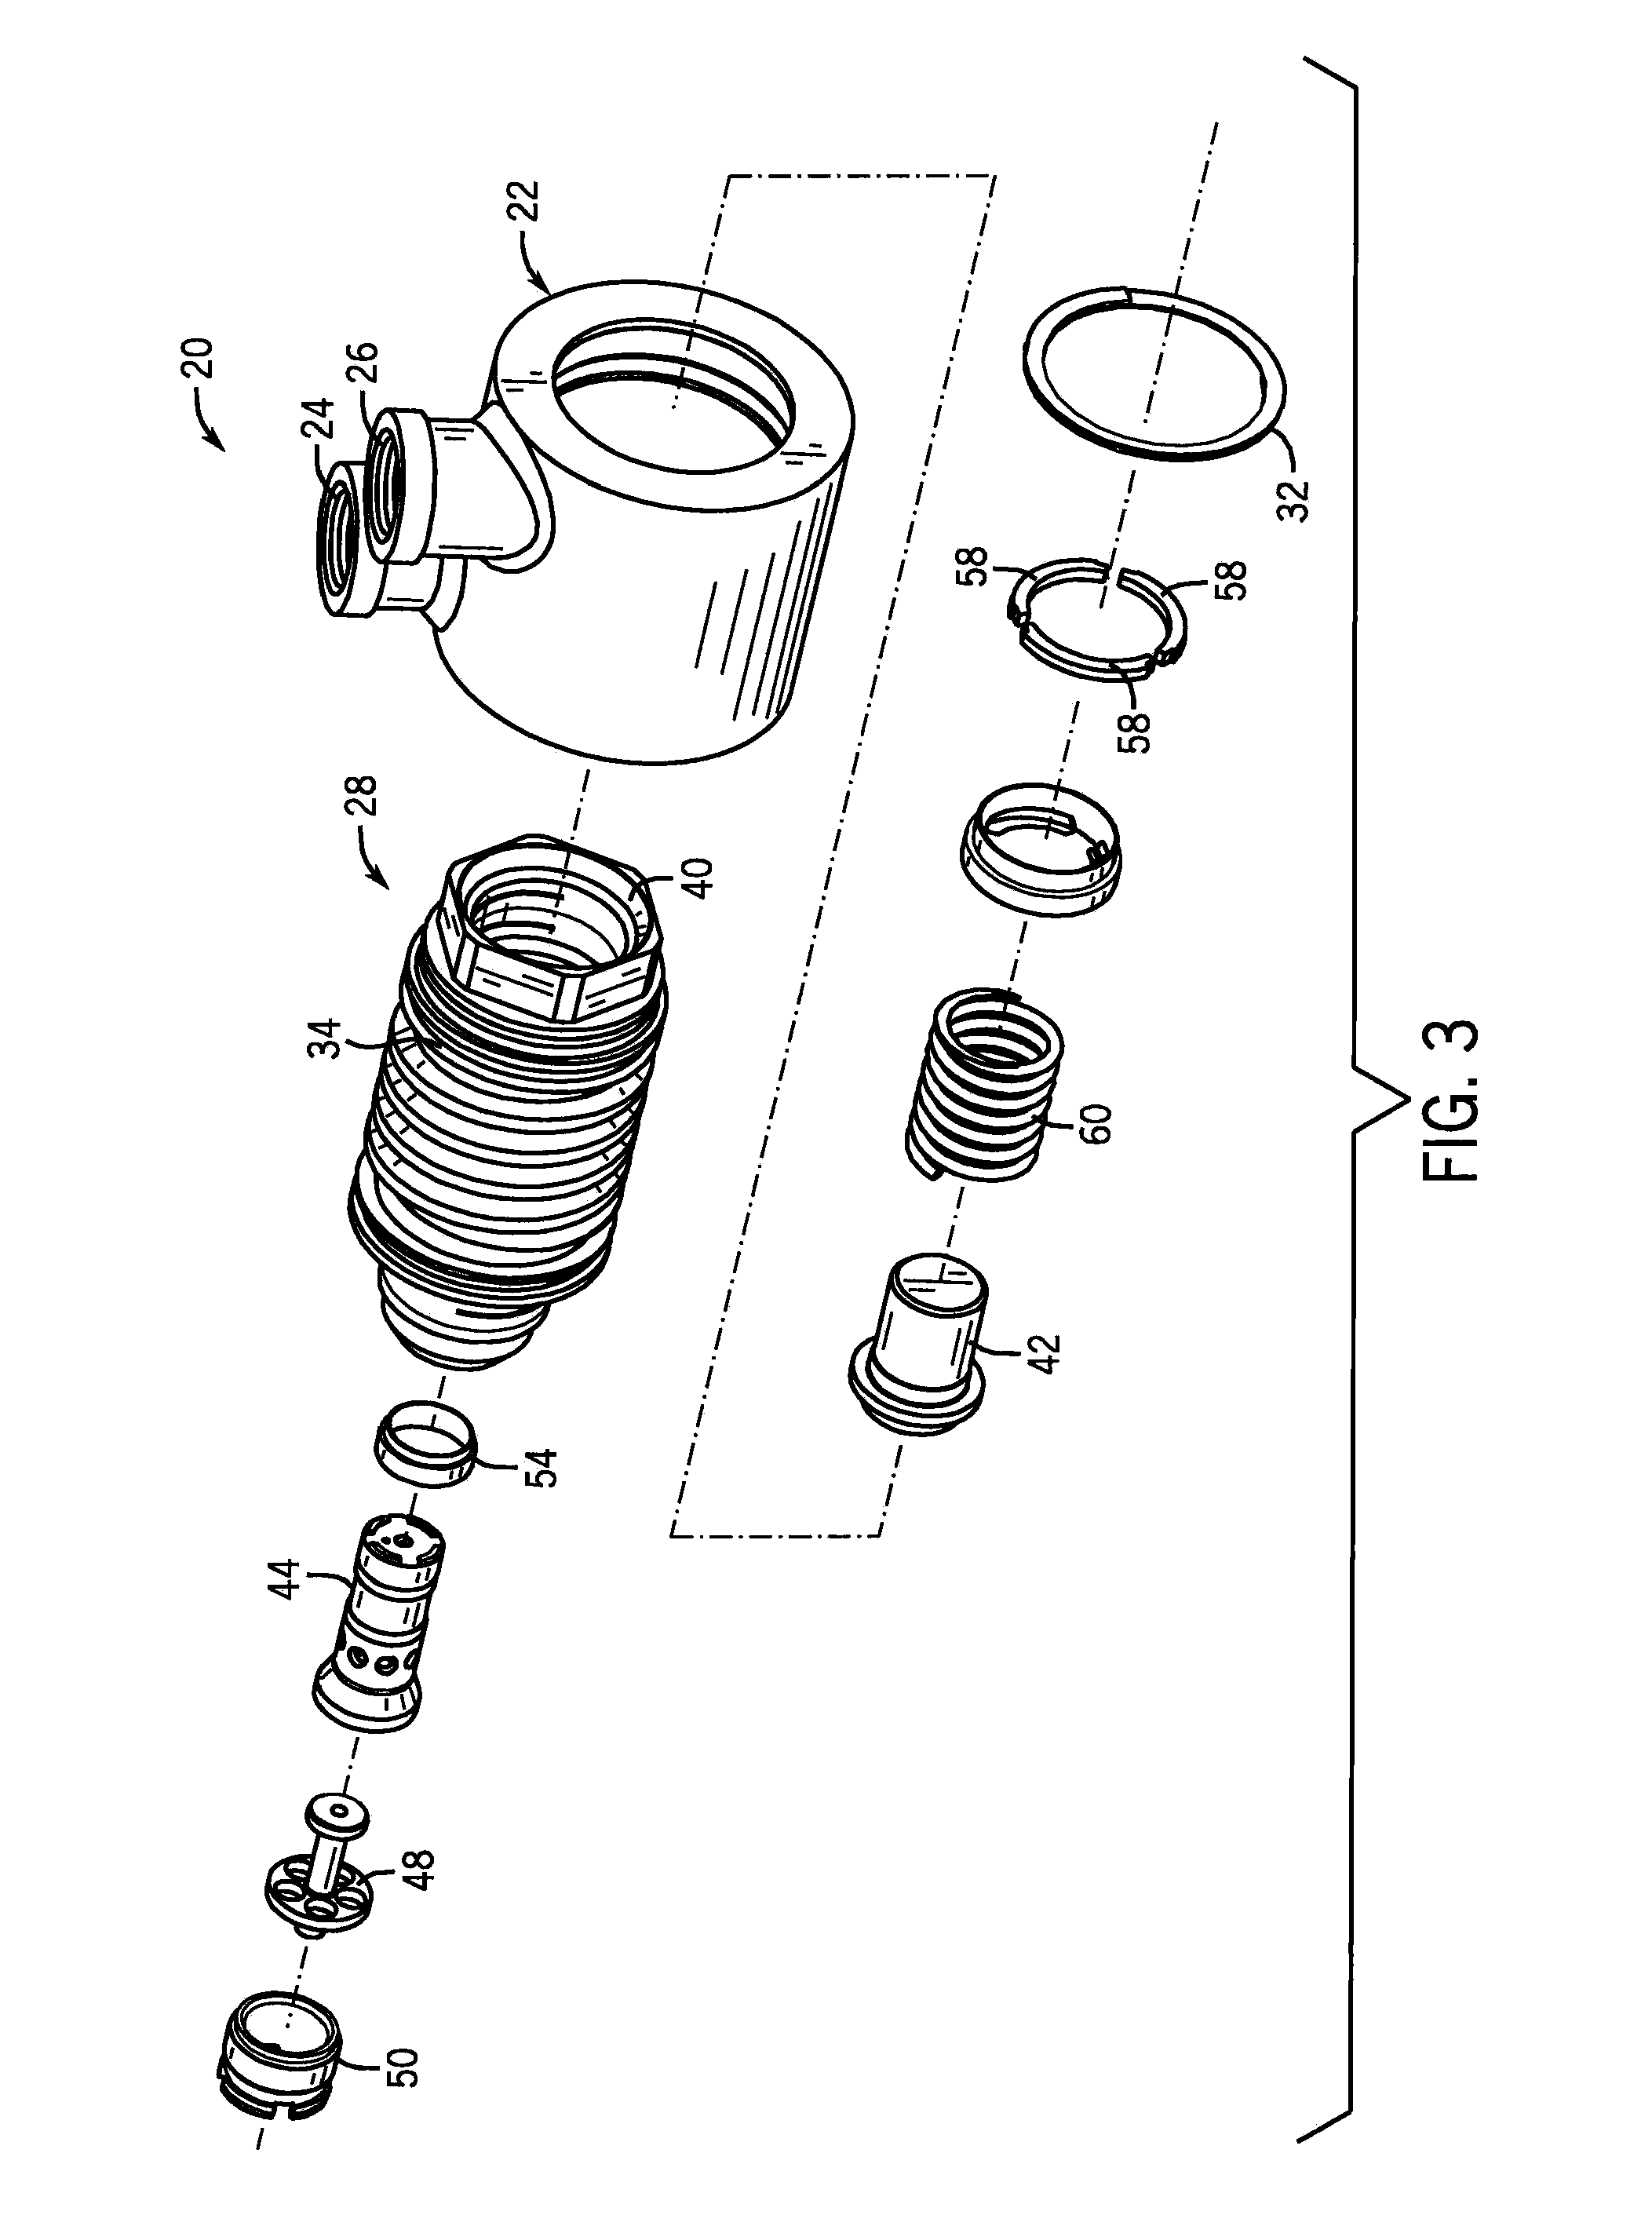 Valve with swirling coolant